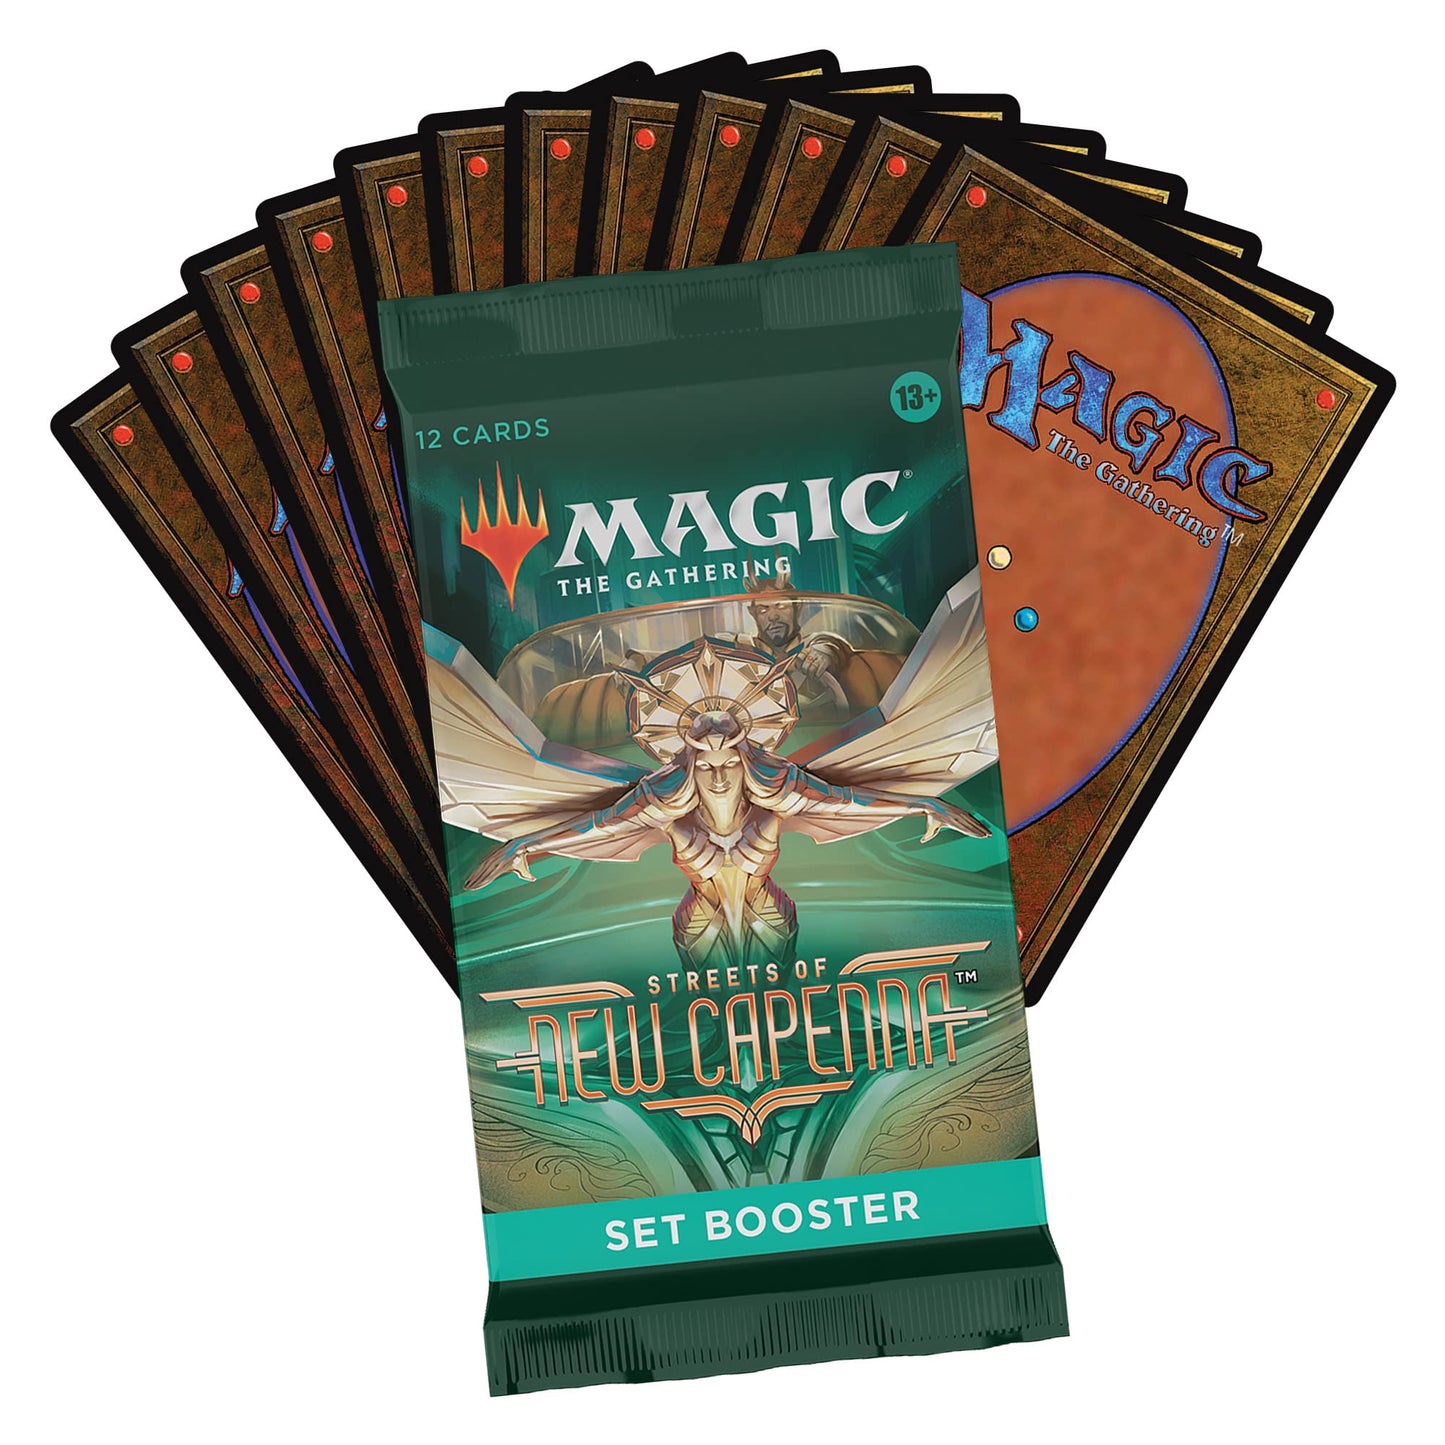 Magic: The Gathering Streets of New Capenna Set Booster Box | 30 Packs + 1 Box Topper (361 Magic Cards)